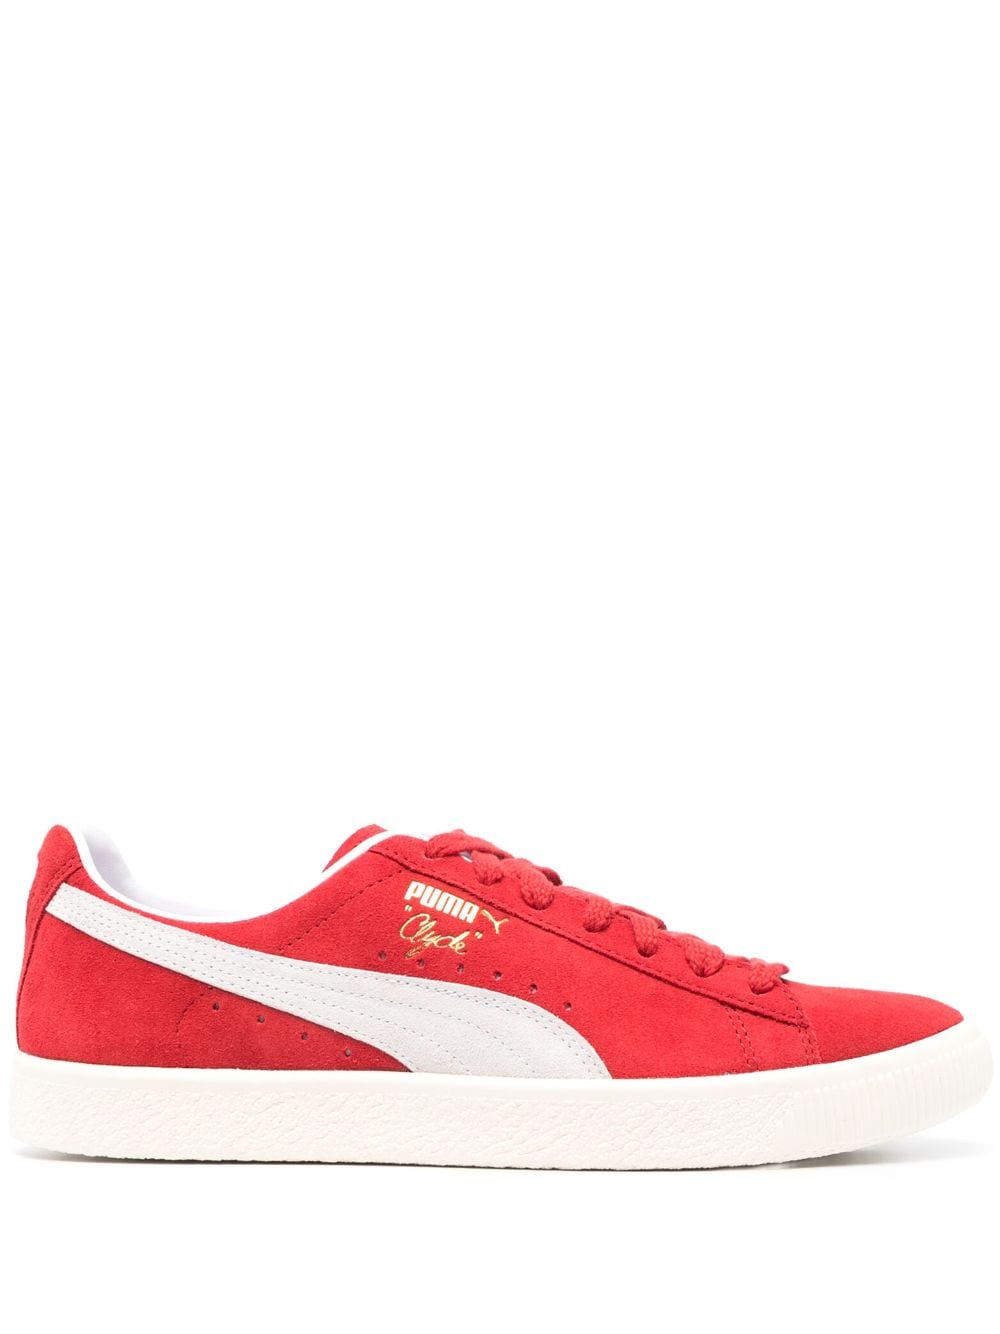 PUMA Clyde leather sneakers - Red von PUMA